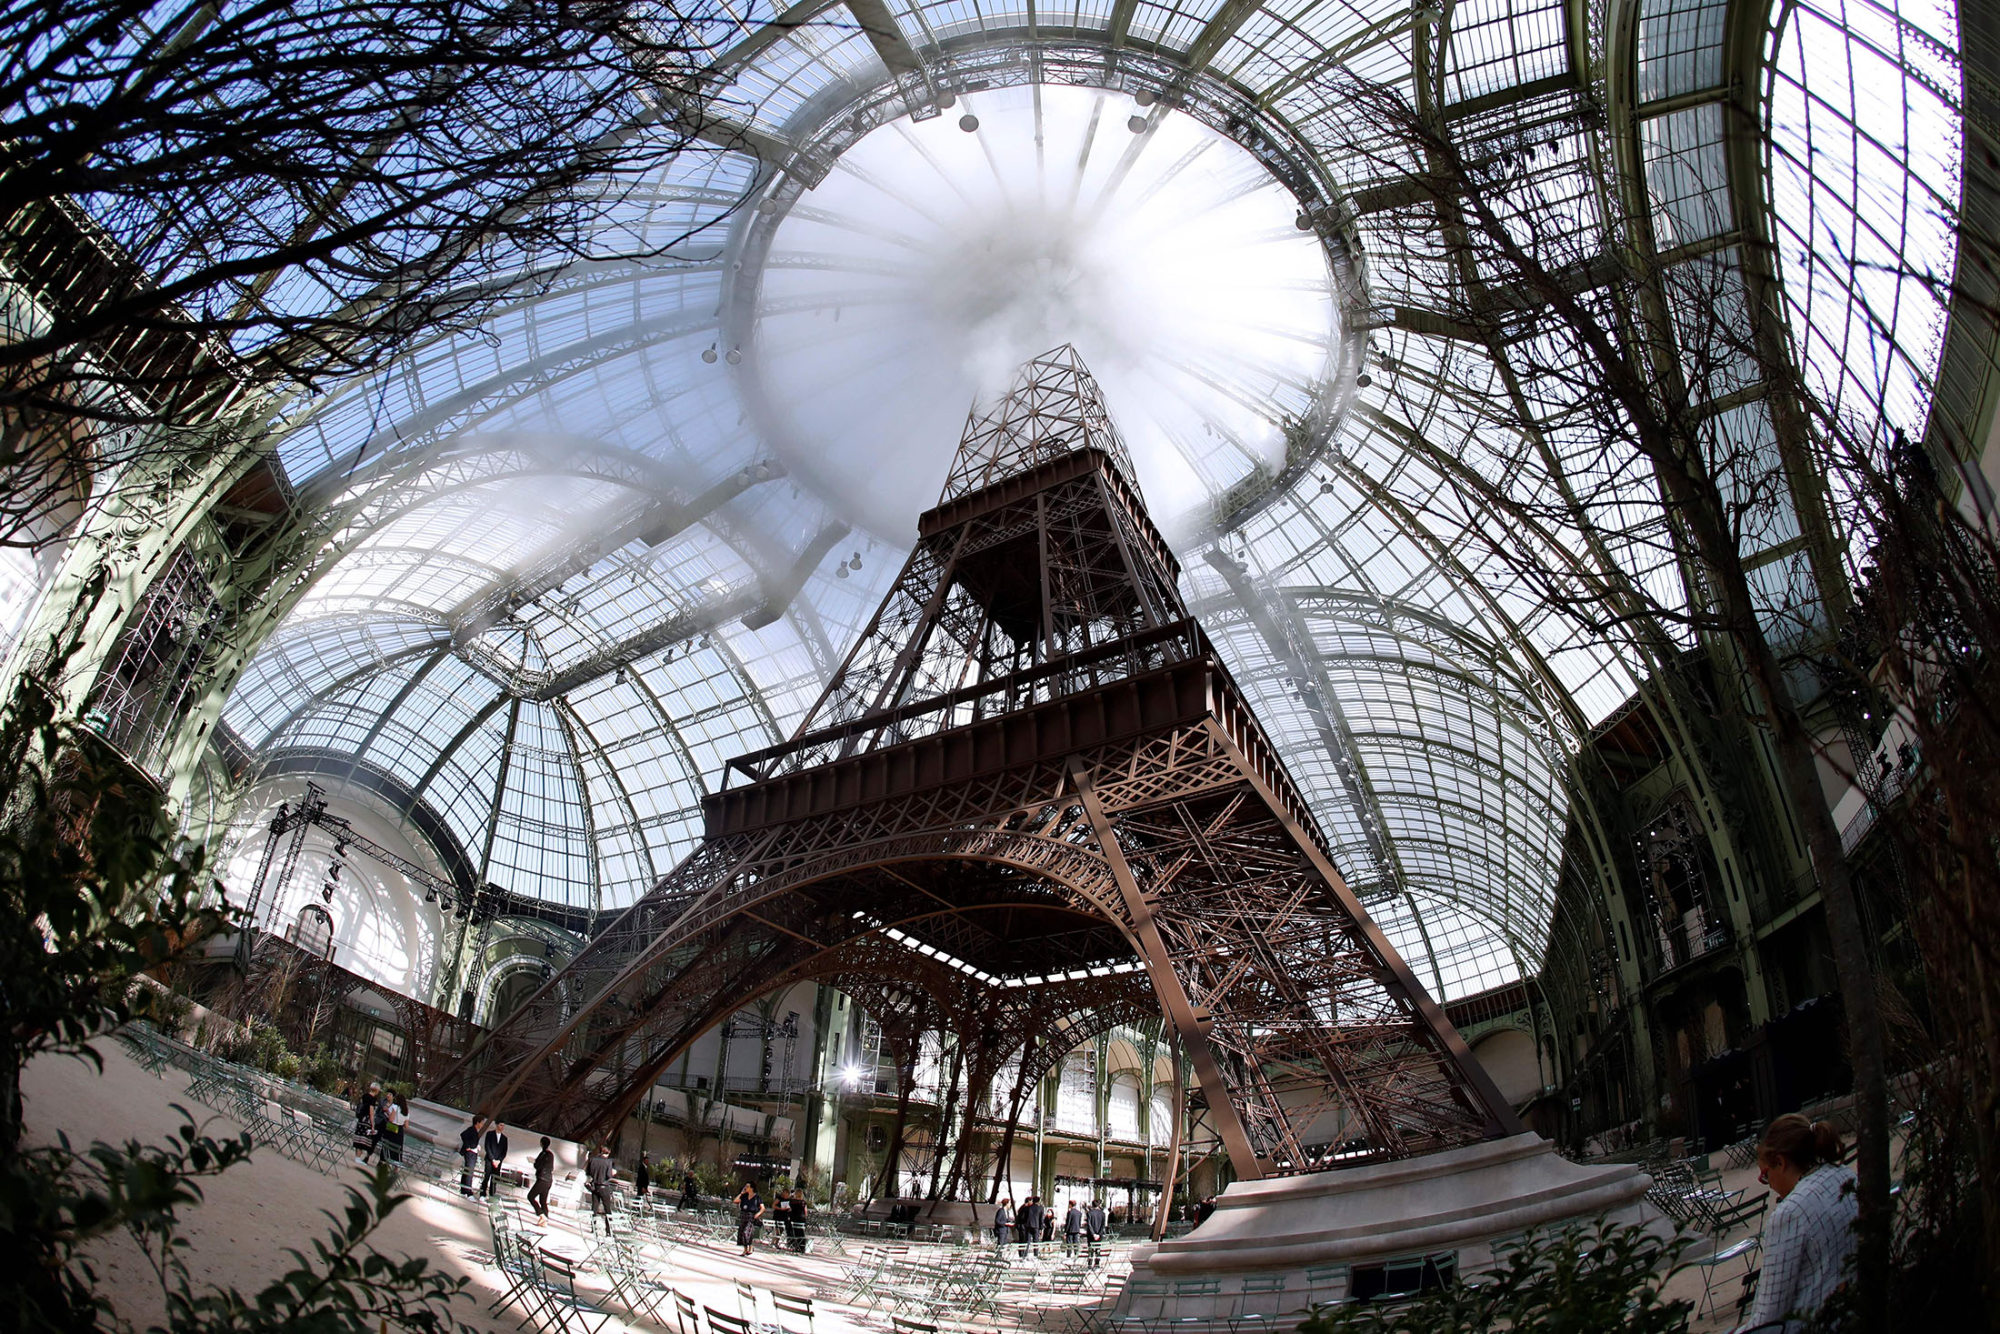 Chanel Aims High With Starry 'Eiffel Tower' Paris Show - Bloomberg